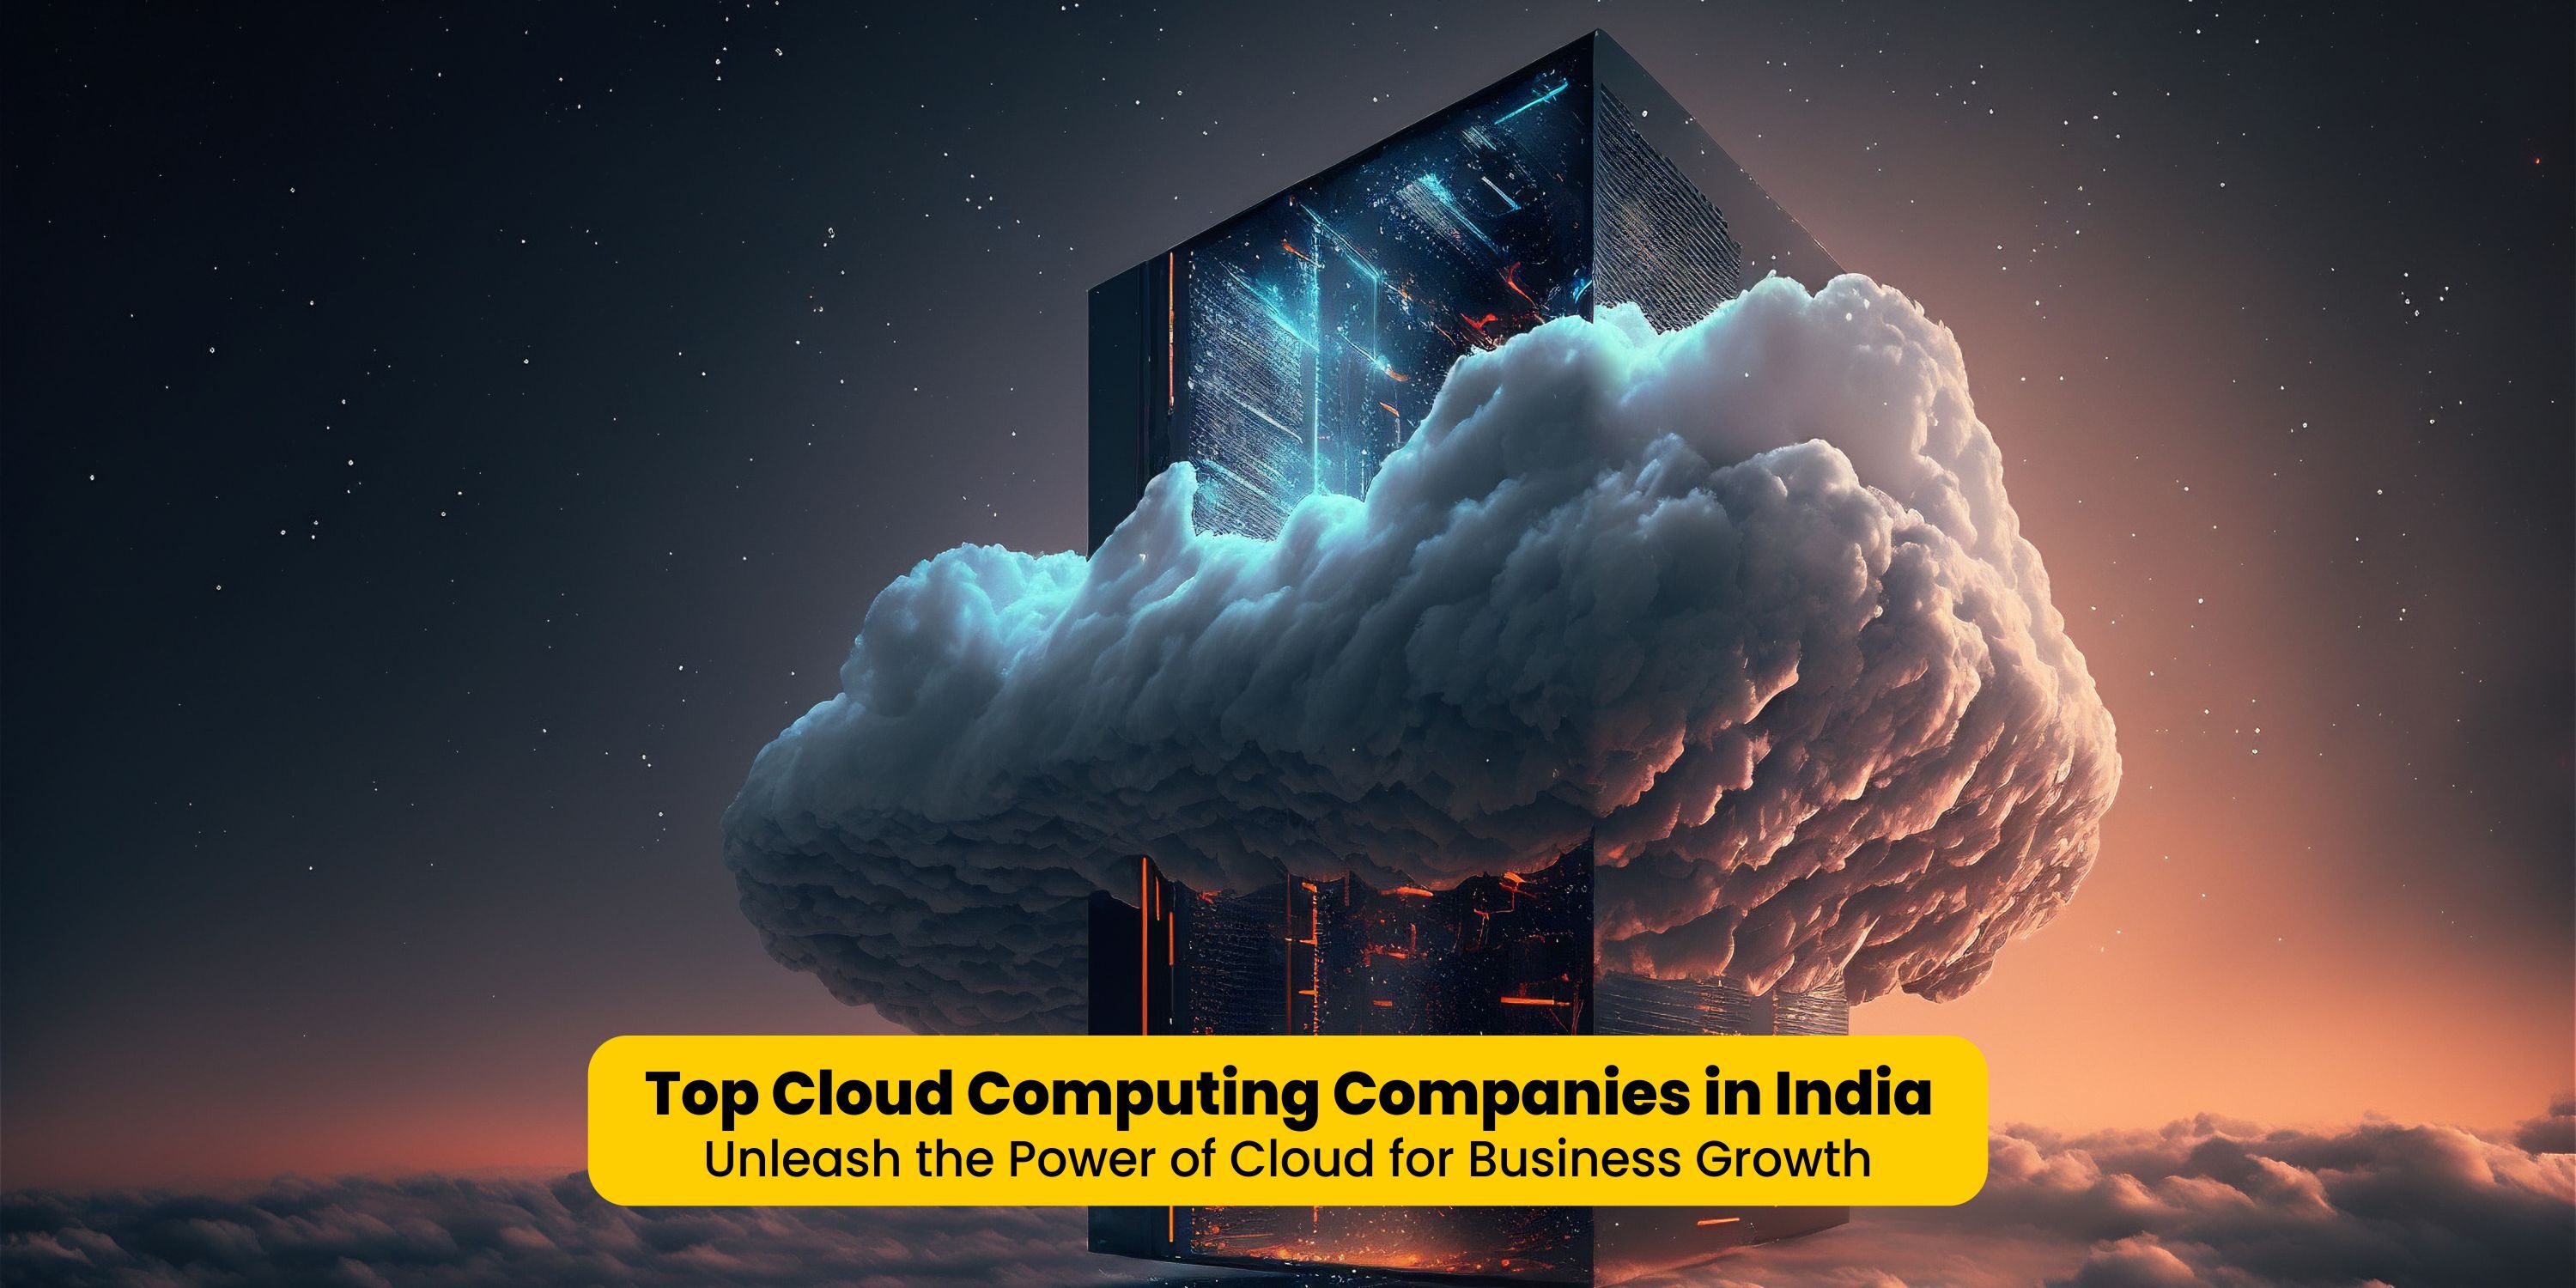 Top Cloud Computing Companies in India: Unleash the Power of Cloud for Business Growth